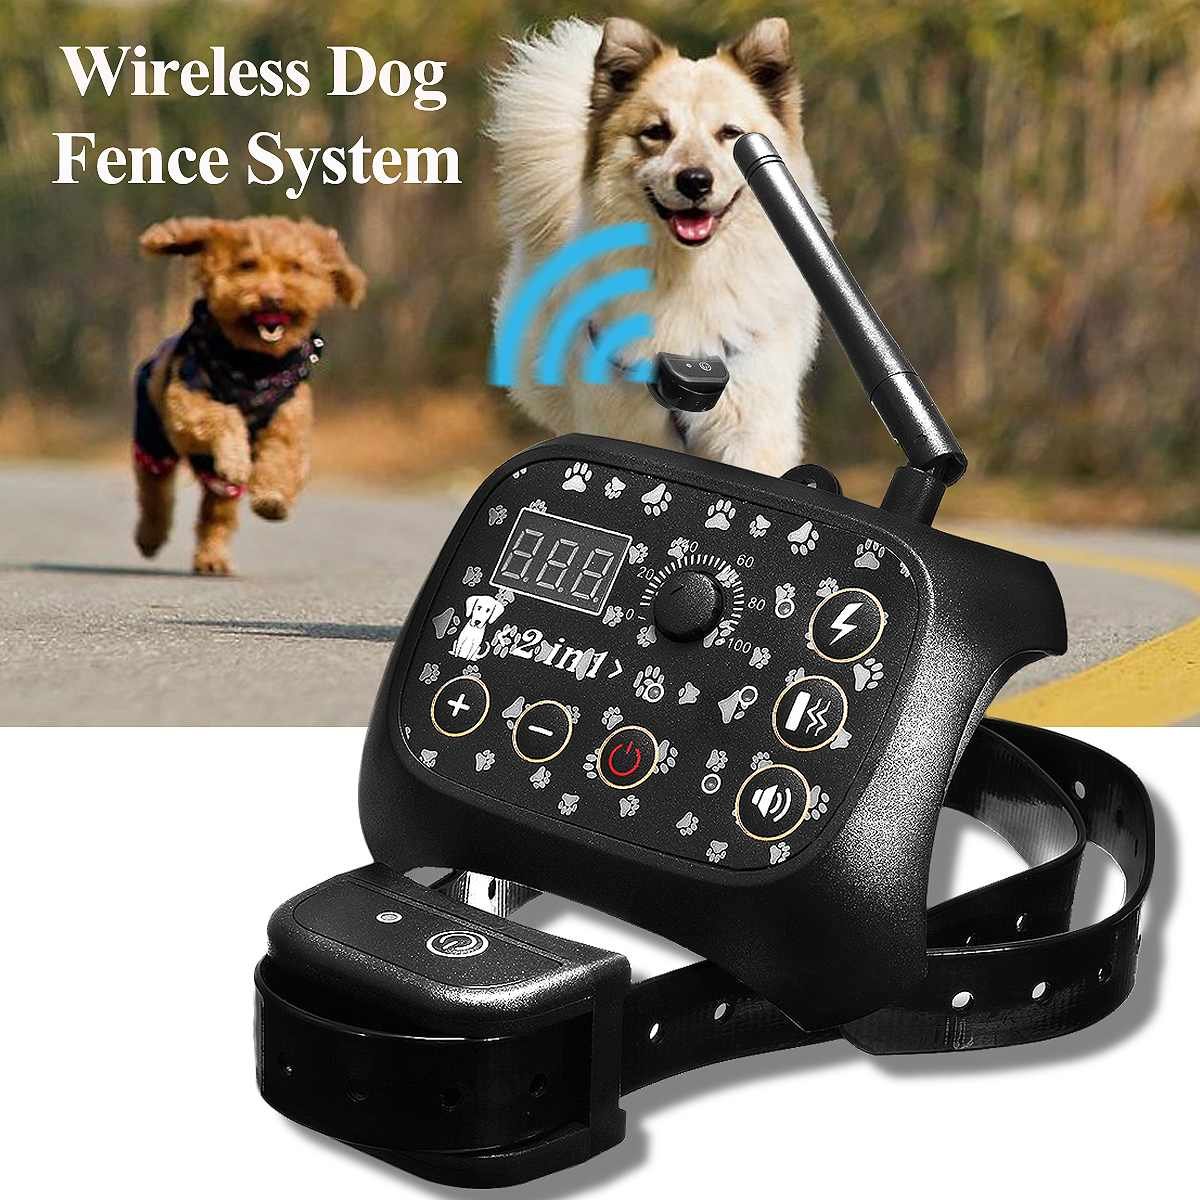 this Wireless Dog Fence System has an overly complicated looking control system. Also, all dogs are wireless, unless they are an Aibo.